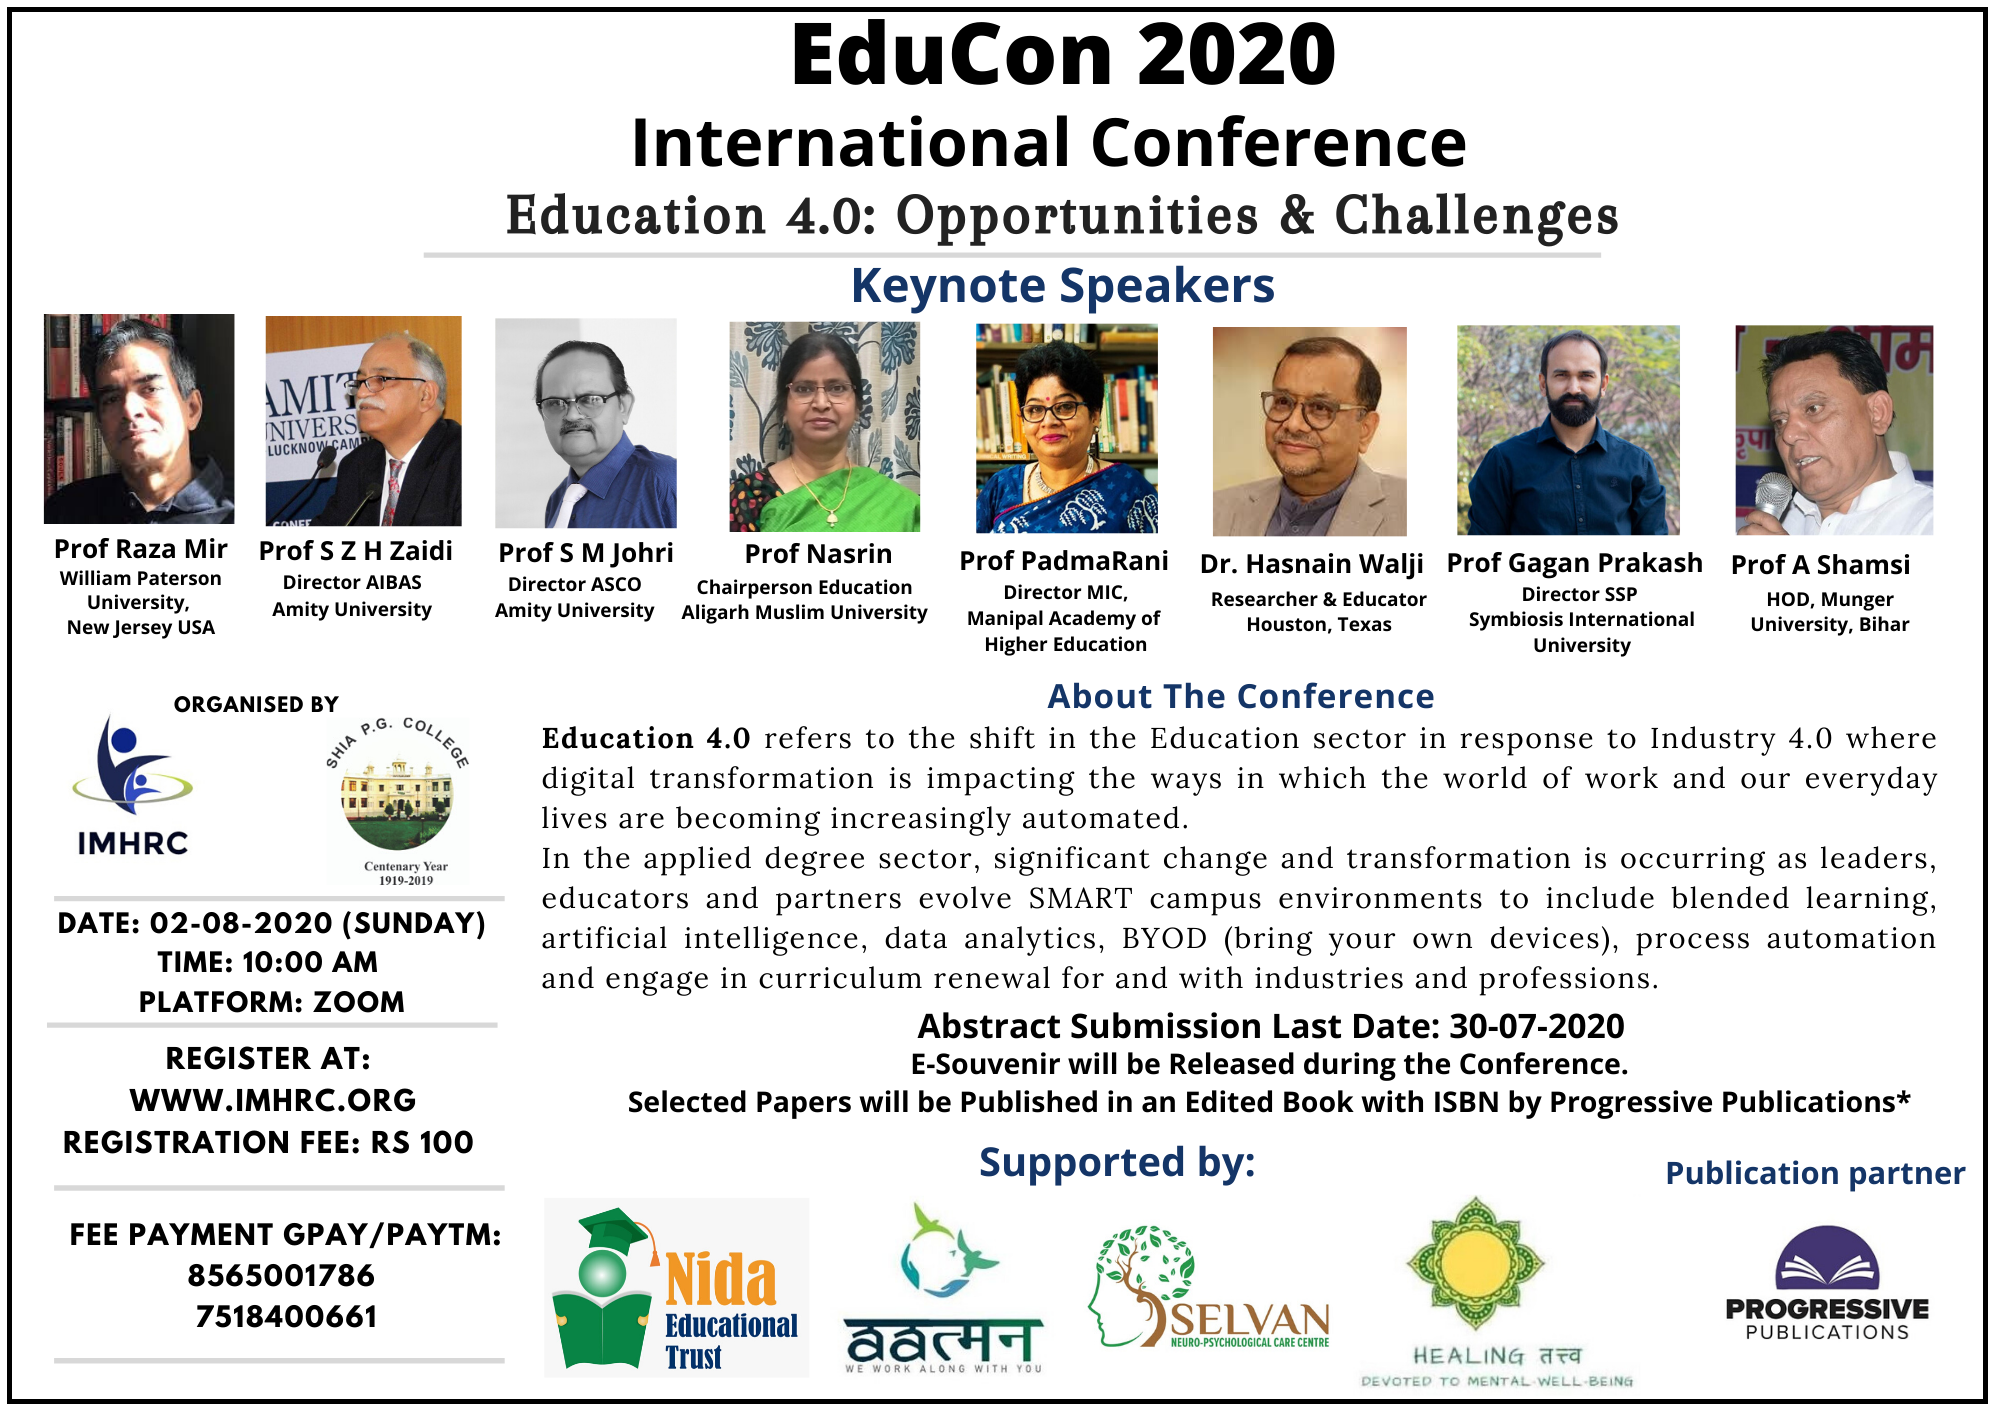 EduCon 2020 International Conference Poster 1